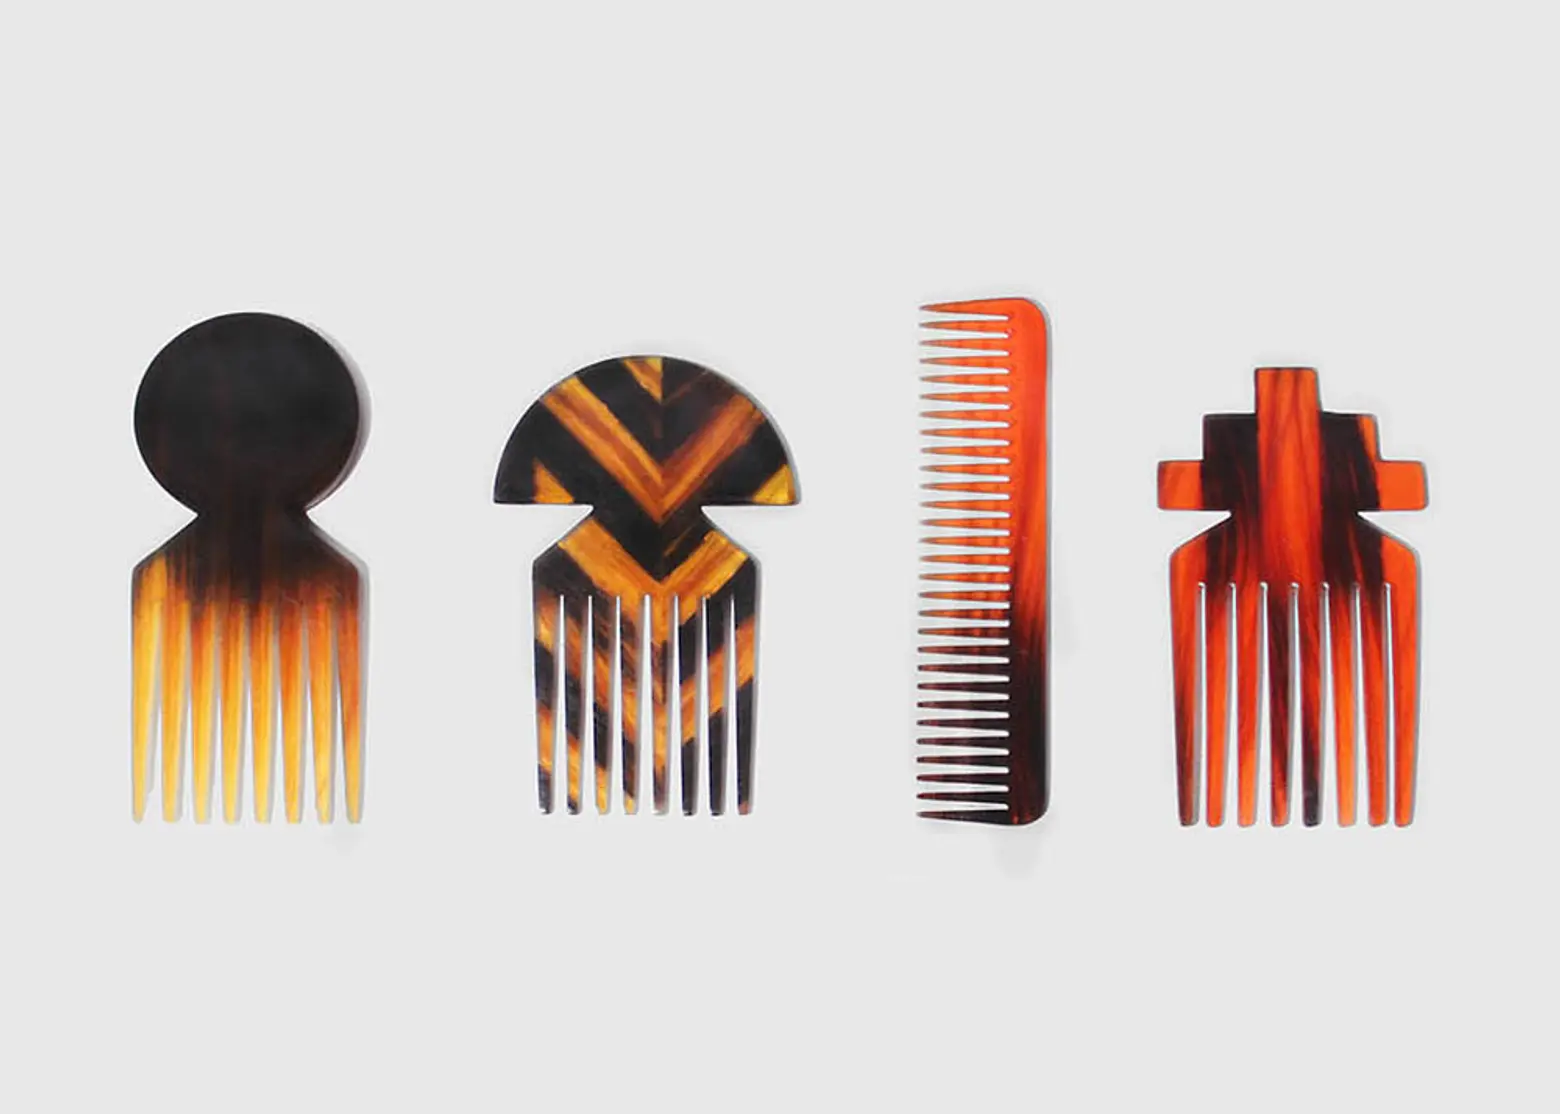 Studio Swine, Hair Highway, hair objects, Anglo-Japanese design, China, Silk Road, vases, combs,